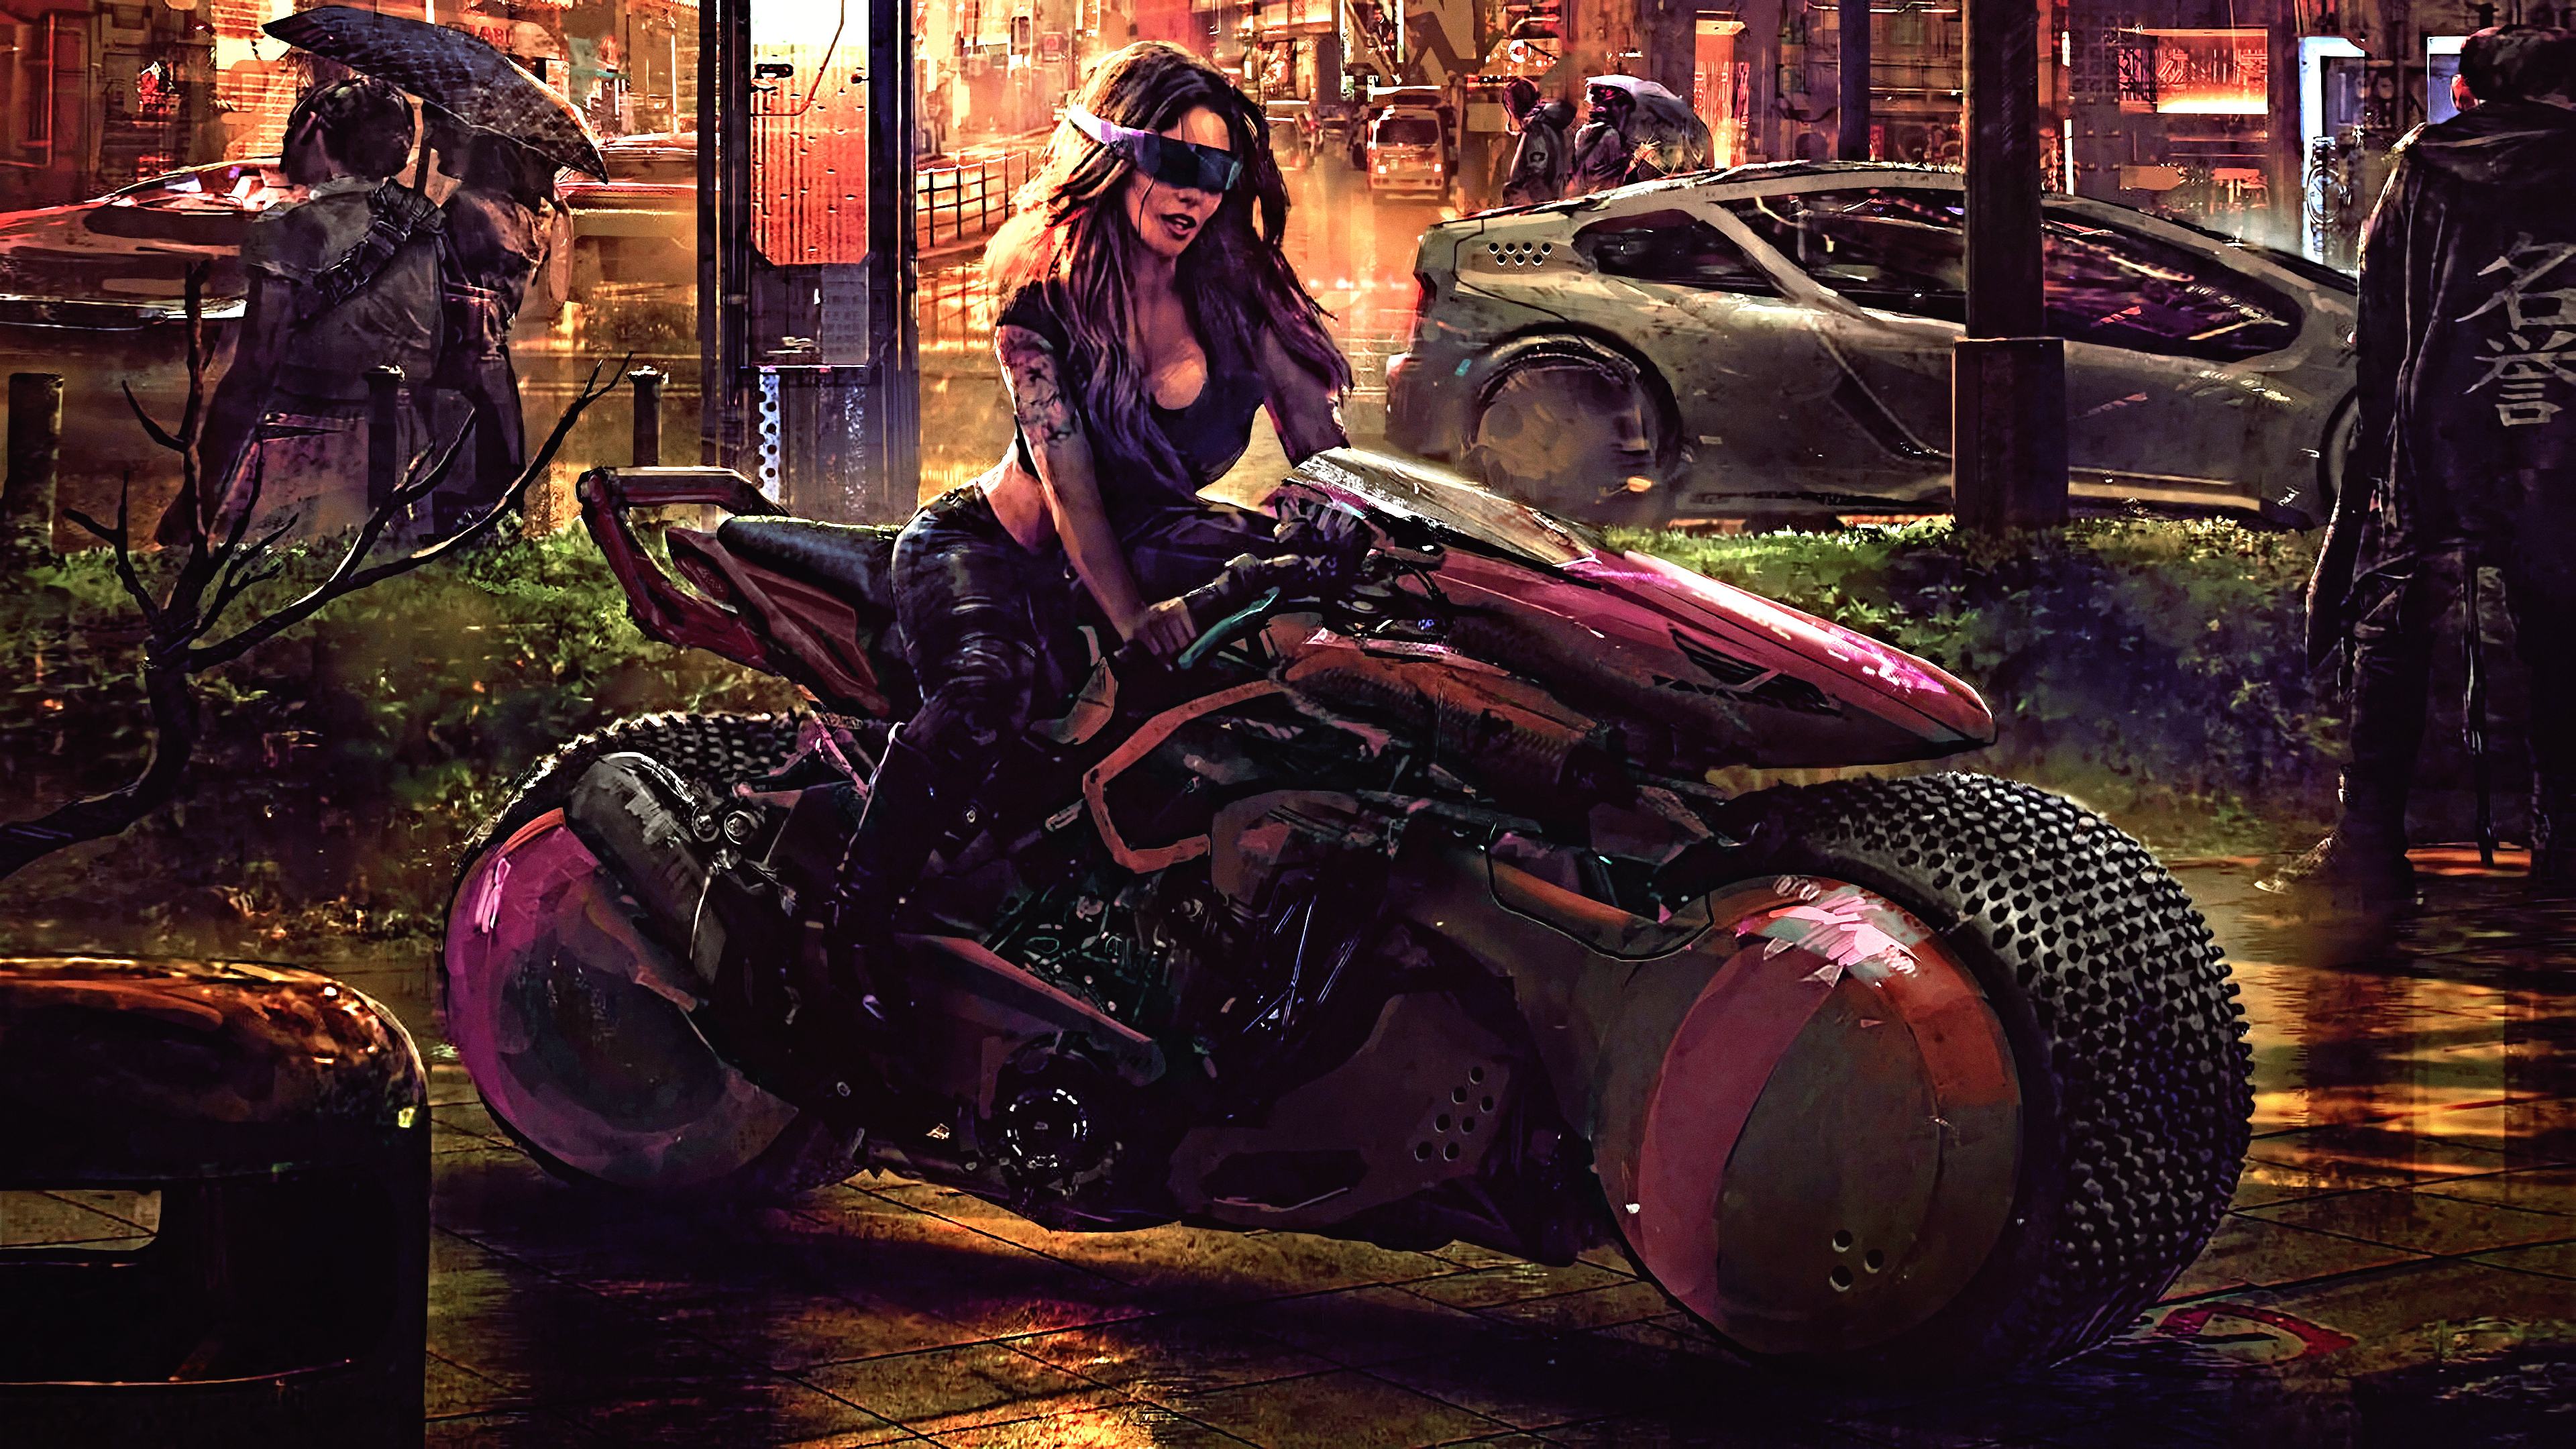 Futuristic cyberpunk motorcycle HD wallpaper for desktop background with a Sci-Fi theme.